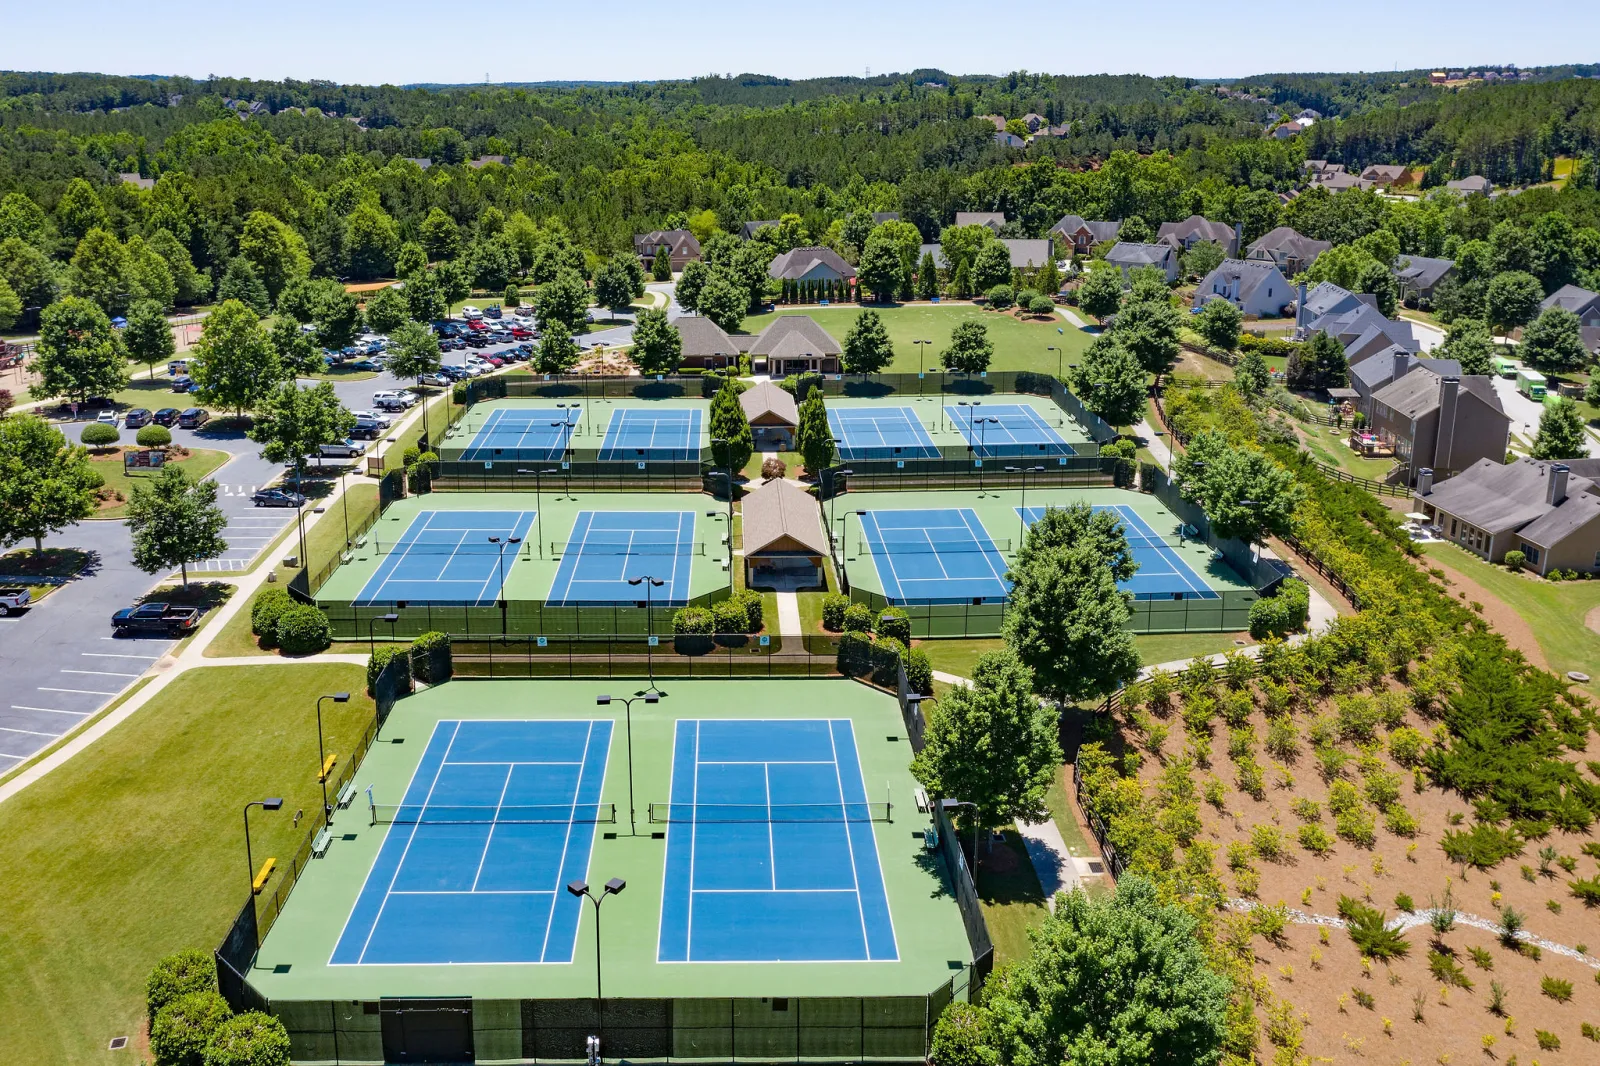 an overhead view of the many tennis courts at NatureWalk